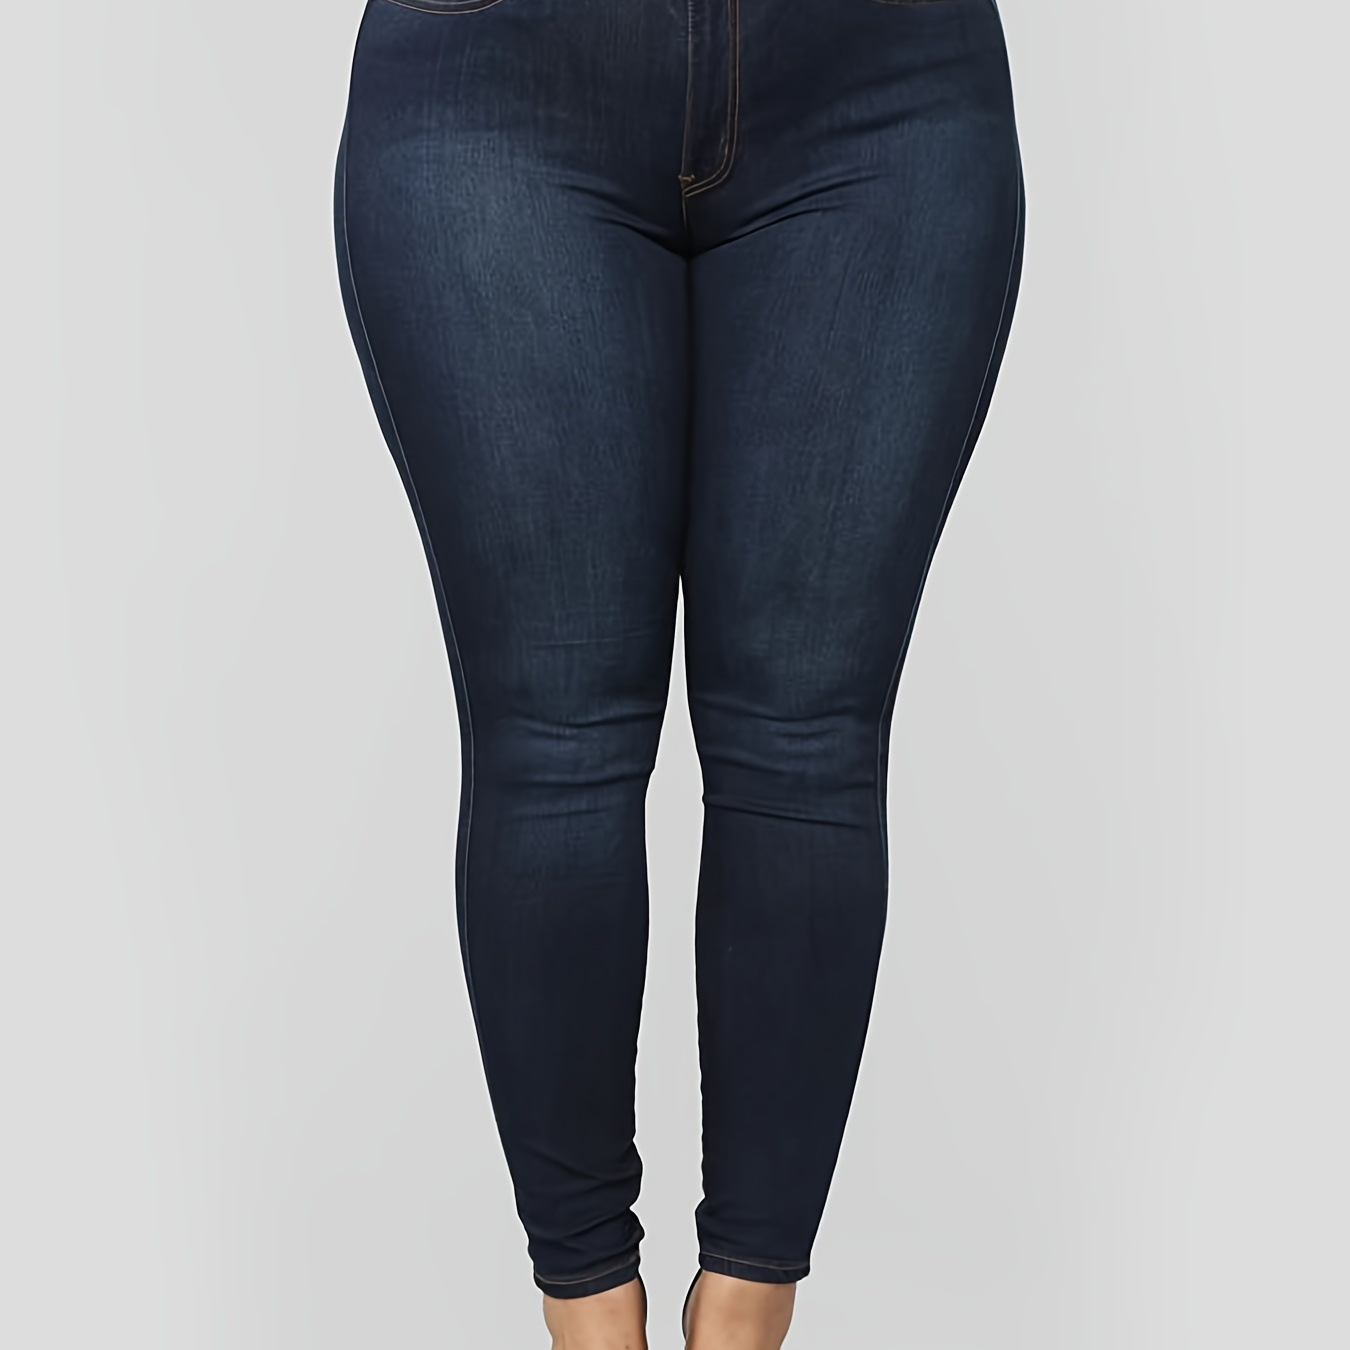 

Plus Size High Rise Button Fly Skinny Jeans, Women's Plus Slight Stretch Casual Denim Skinny Pants